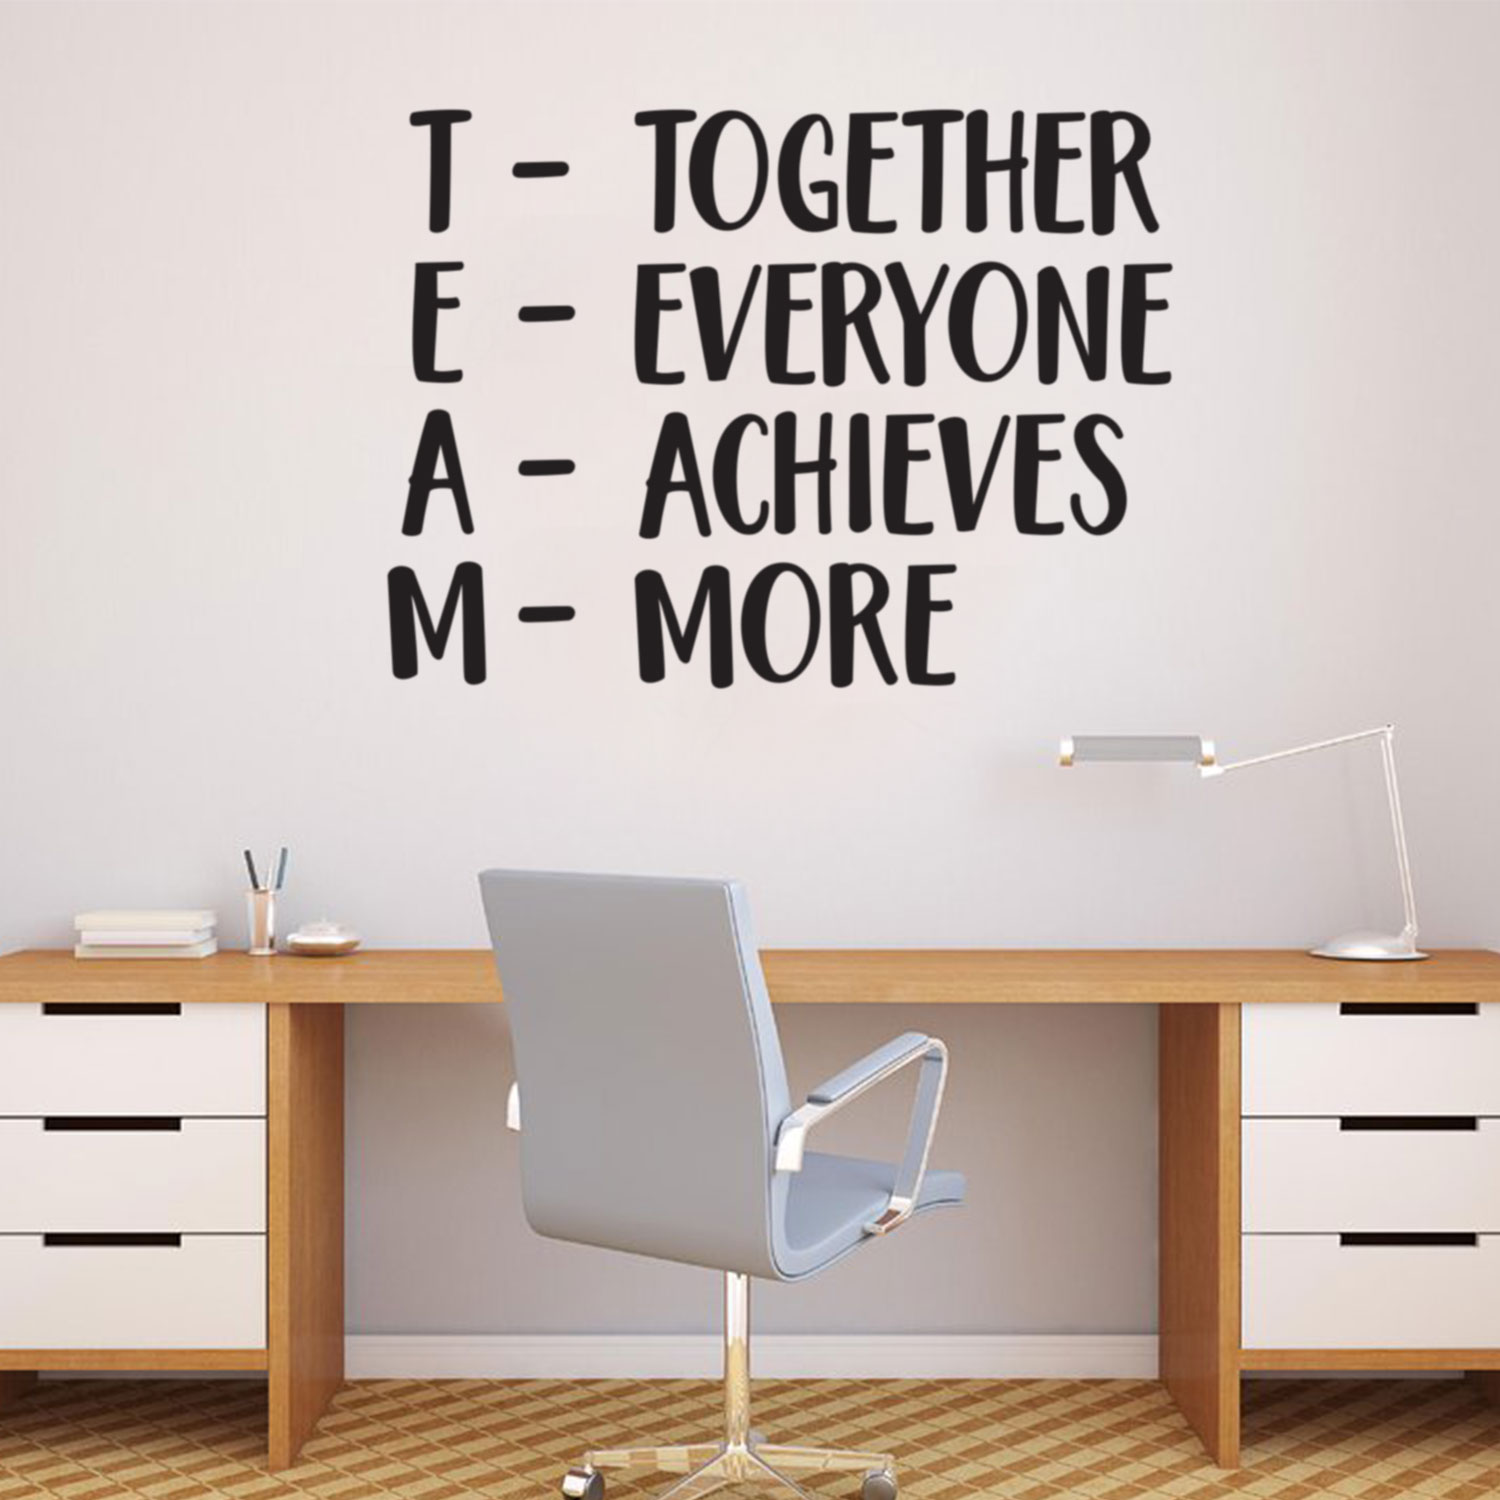 Vinyl Wall Art Decal Together Everyone Achieves More (Team) Quotes 30* x 23* eBay